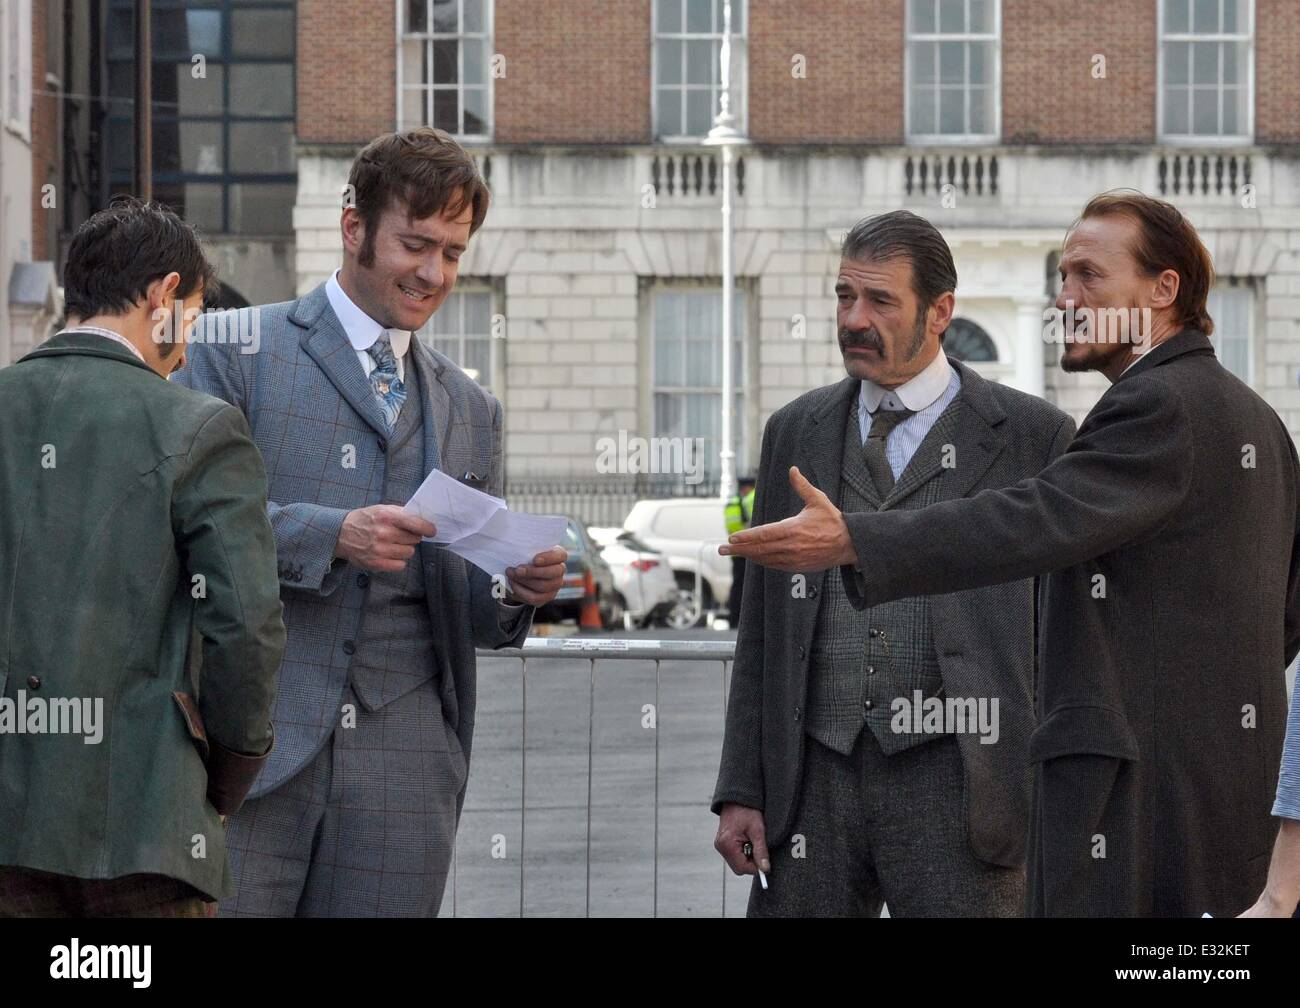 Matthew McFadyen, Jermome Flynn and Adam Rothenberg filming scenes for BBC's Ripper Street on North Great Georges Street. In the scene a police detective is thrown out of a window and impaled on the railings outside. Senator David Norris who lives on the Stock Photo